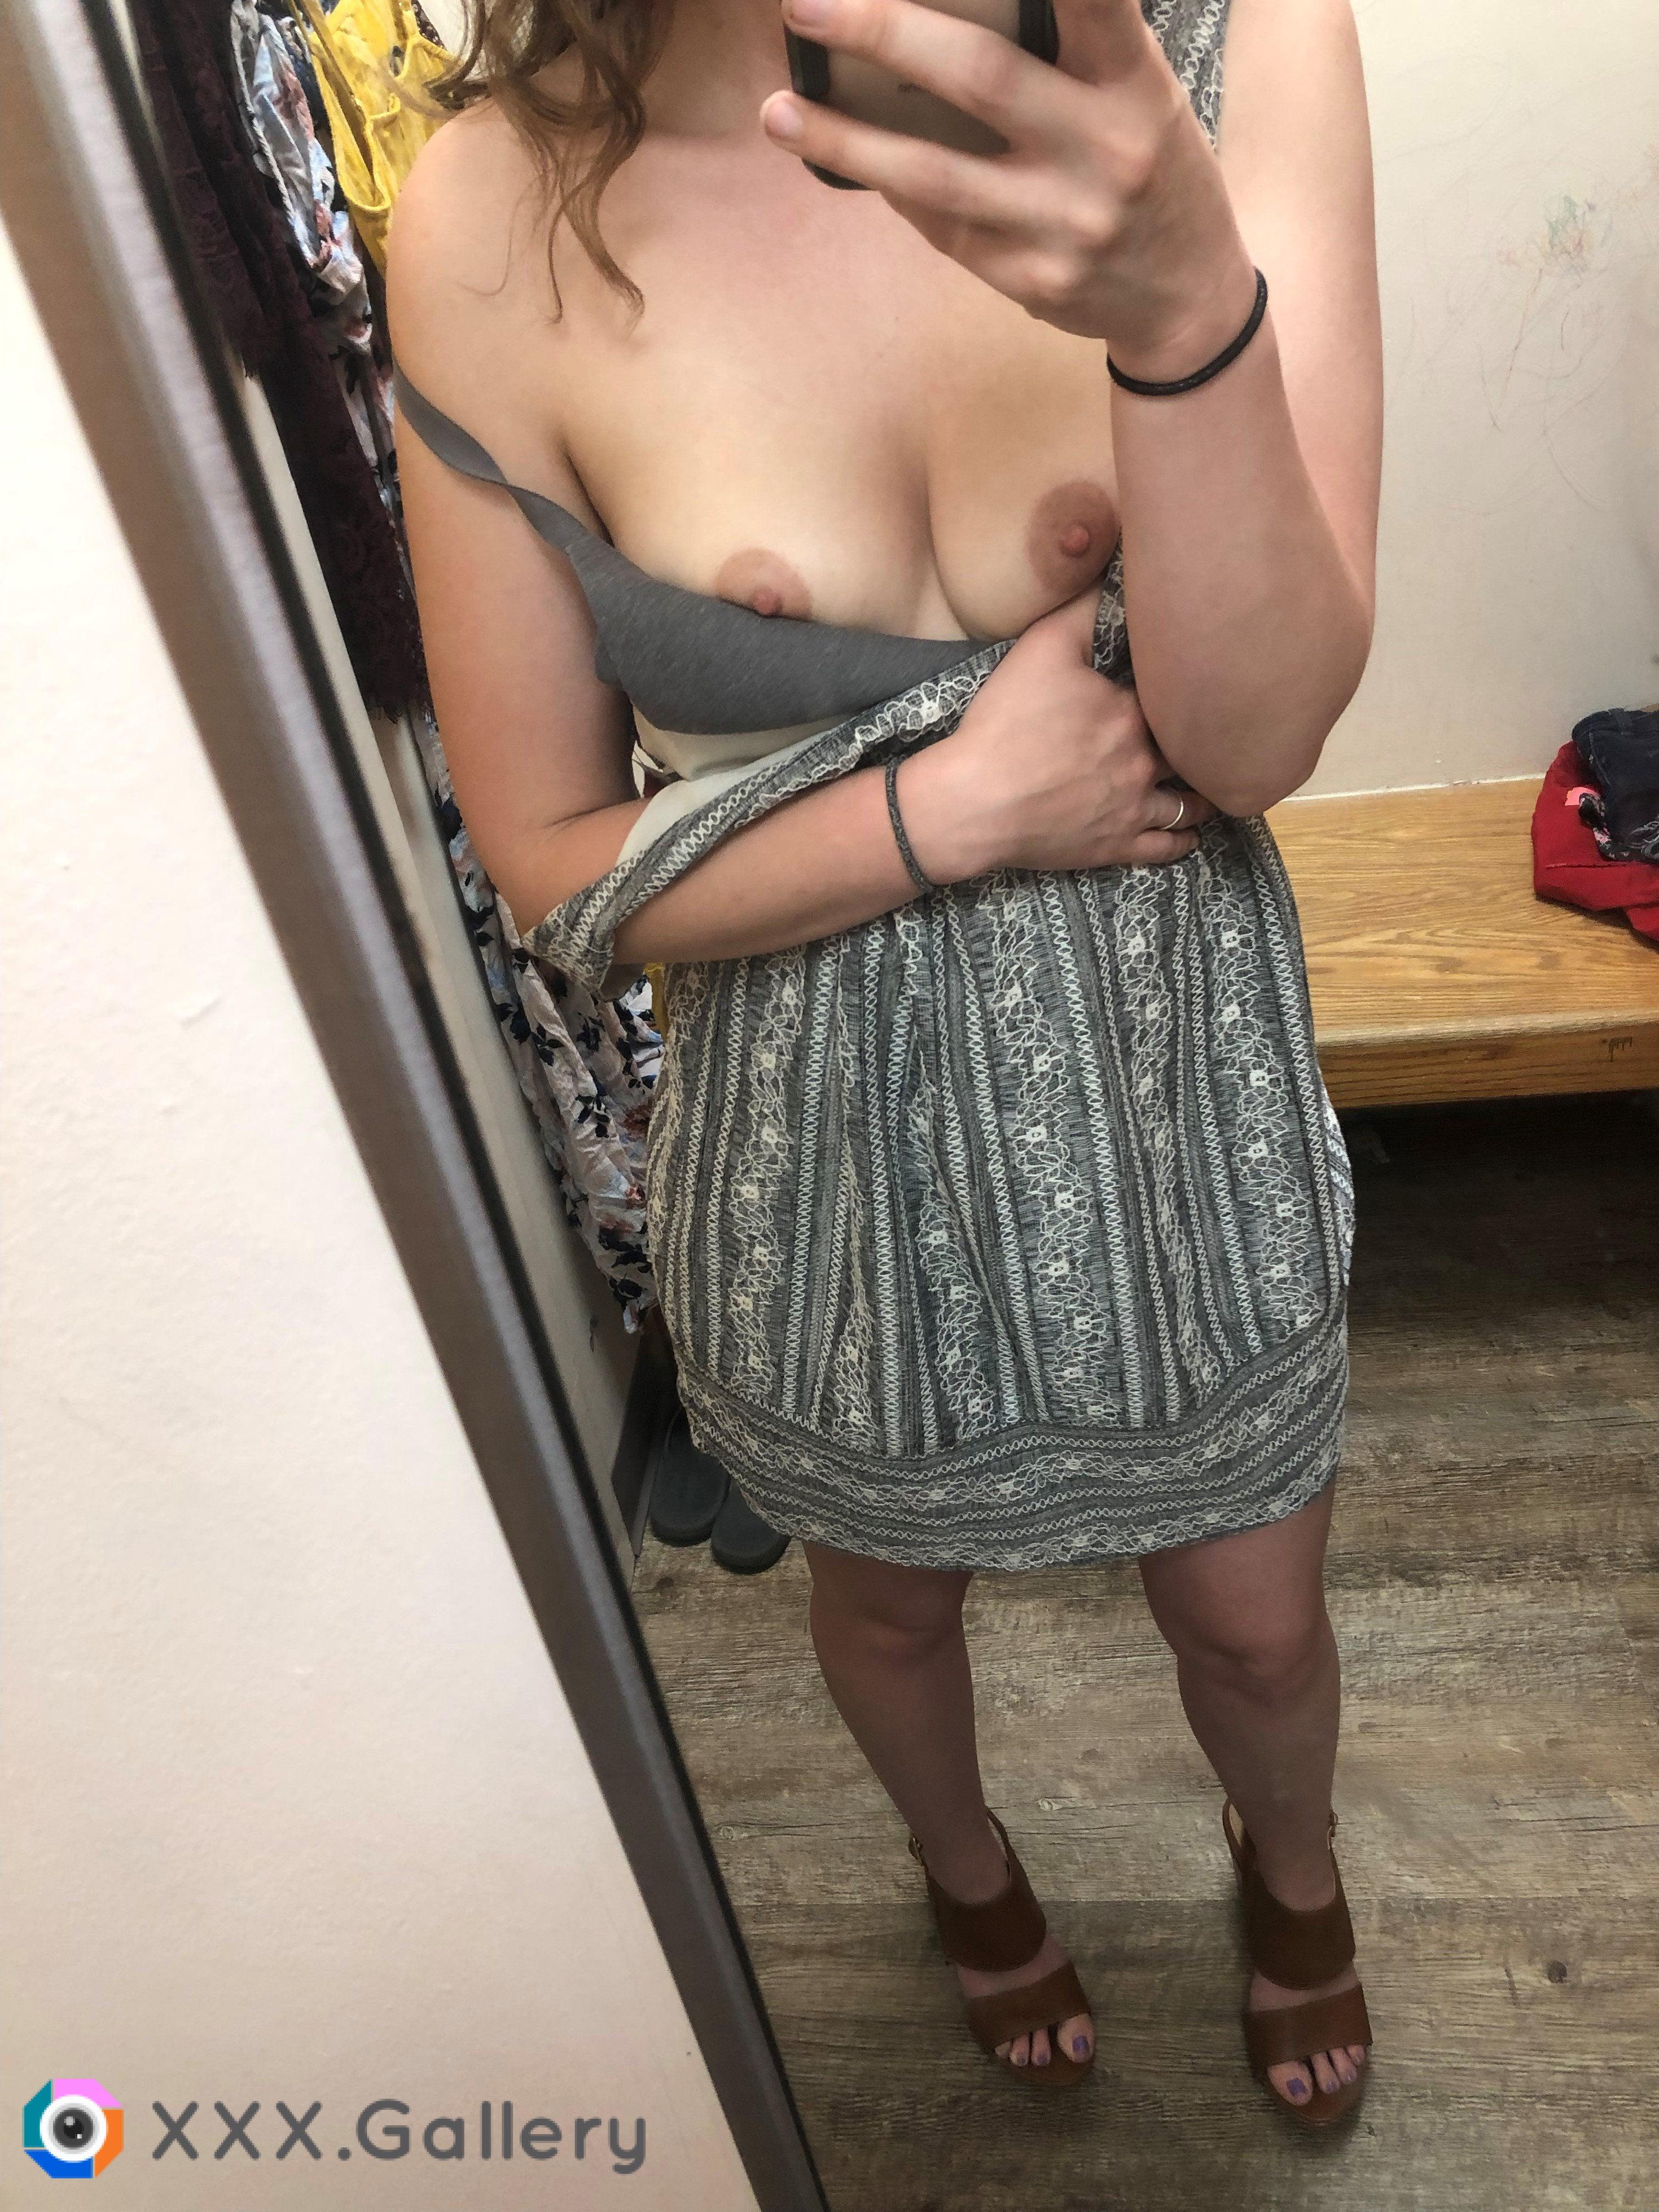 A little titty slip in the Changing Room